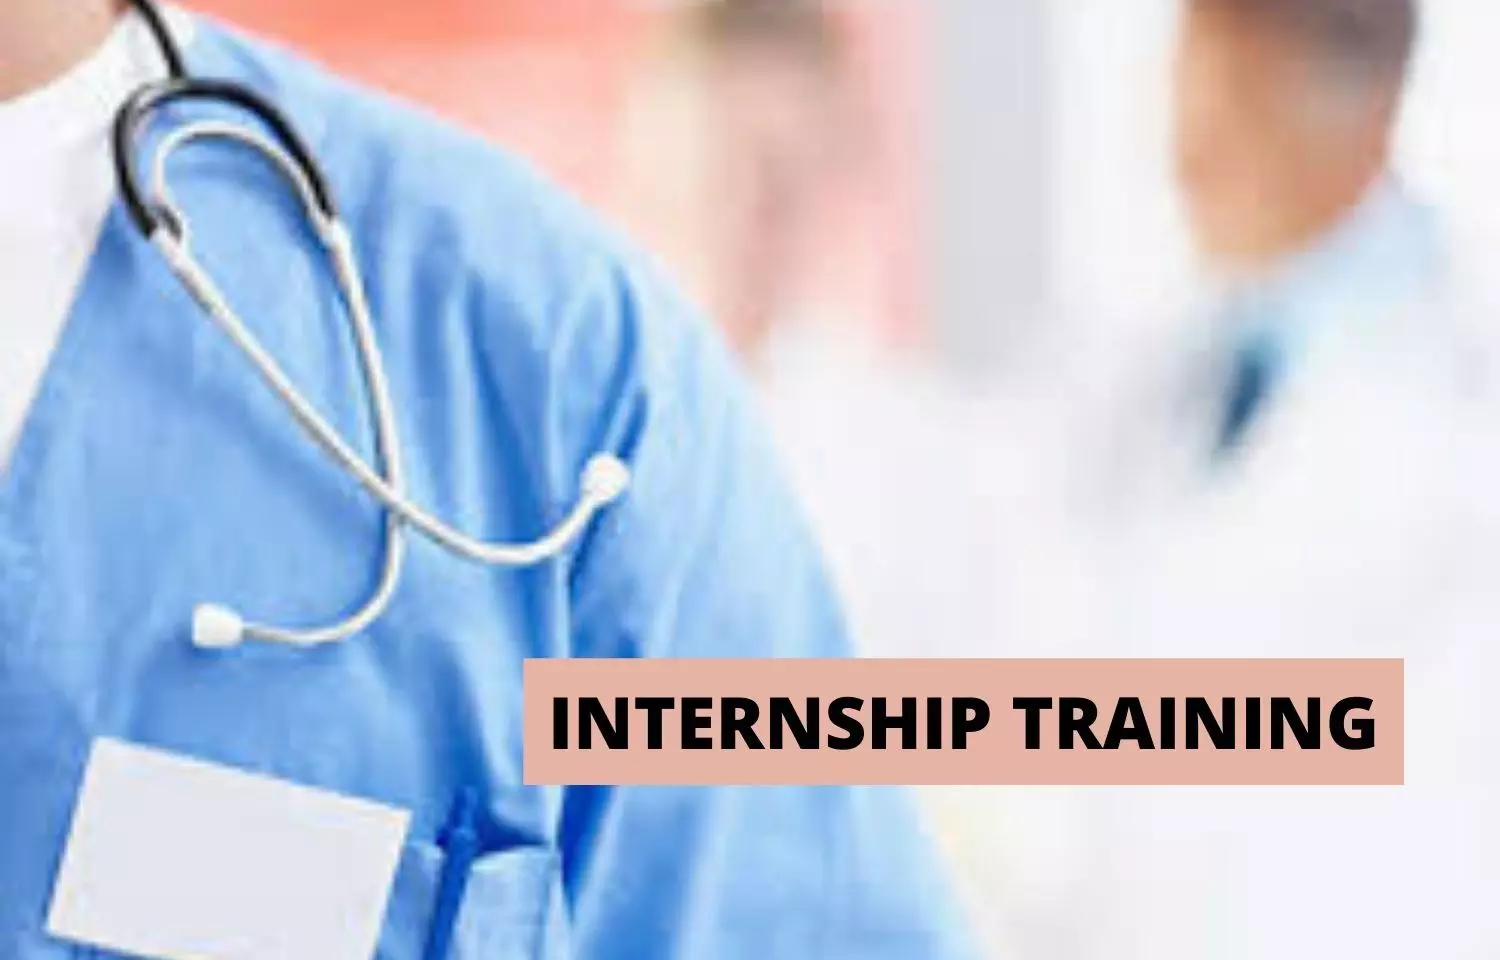 7 Days AYUSH internship to stay for MBBS students